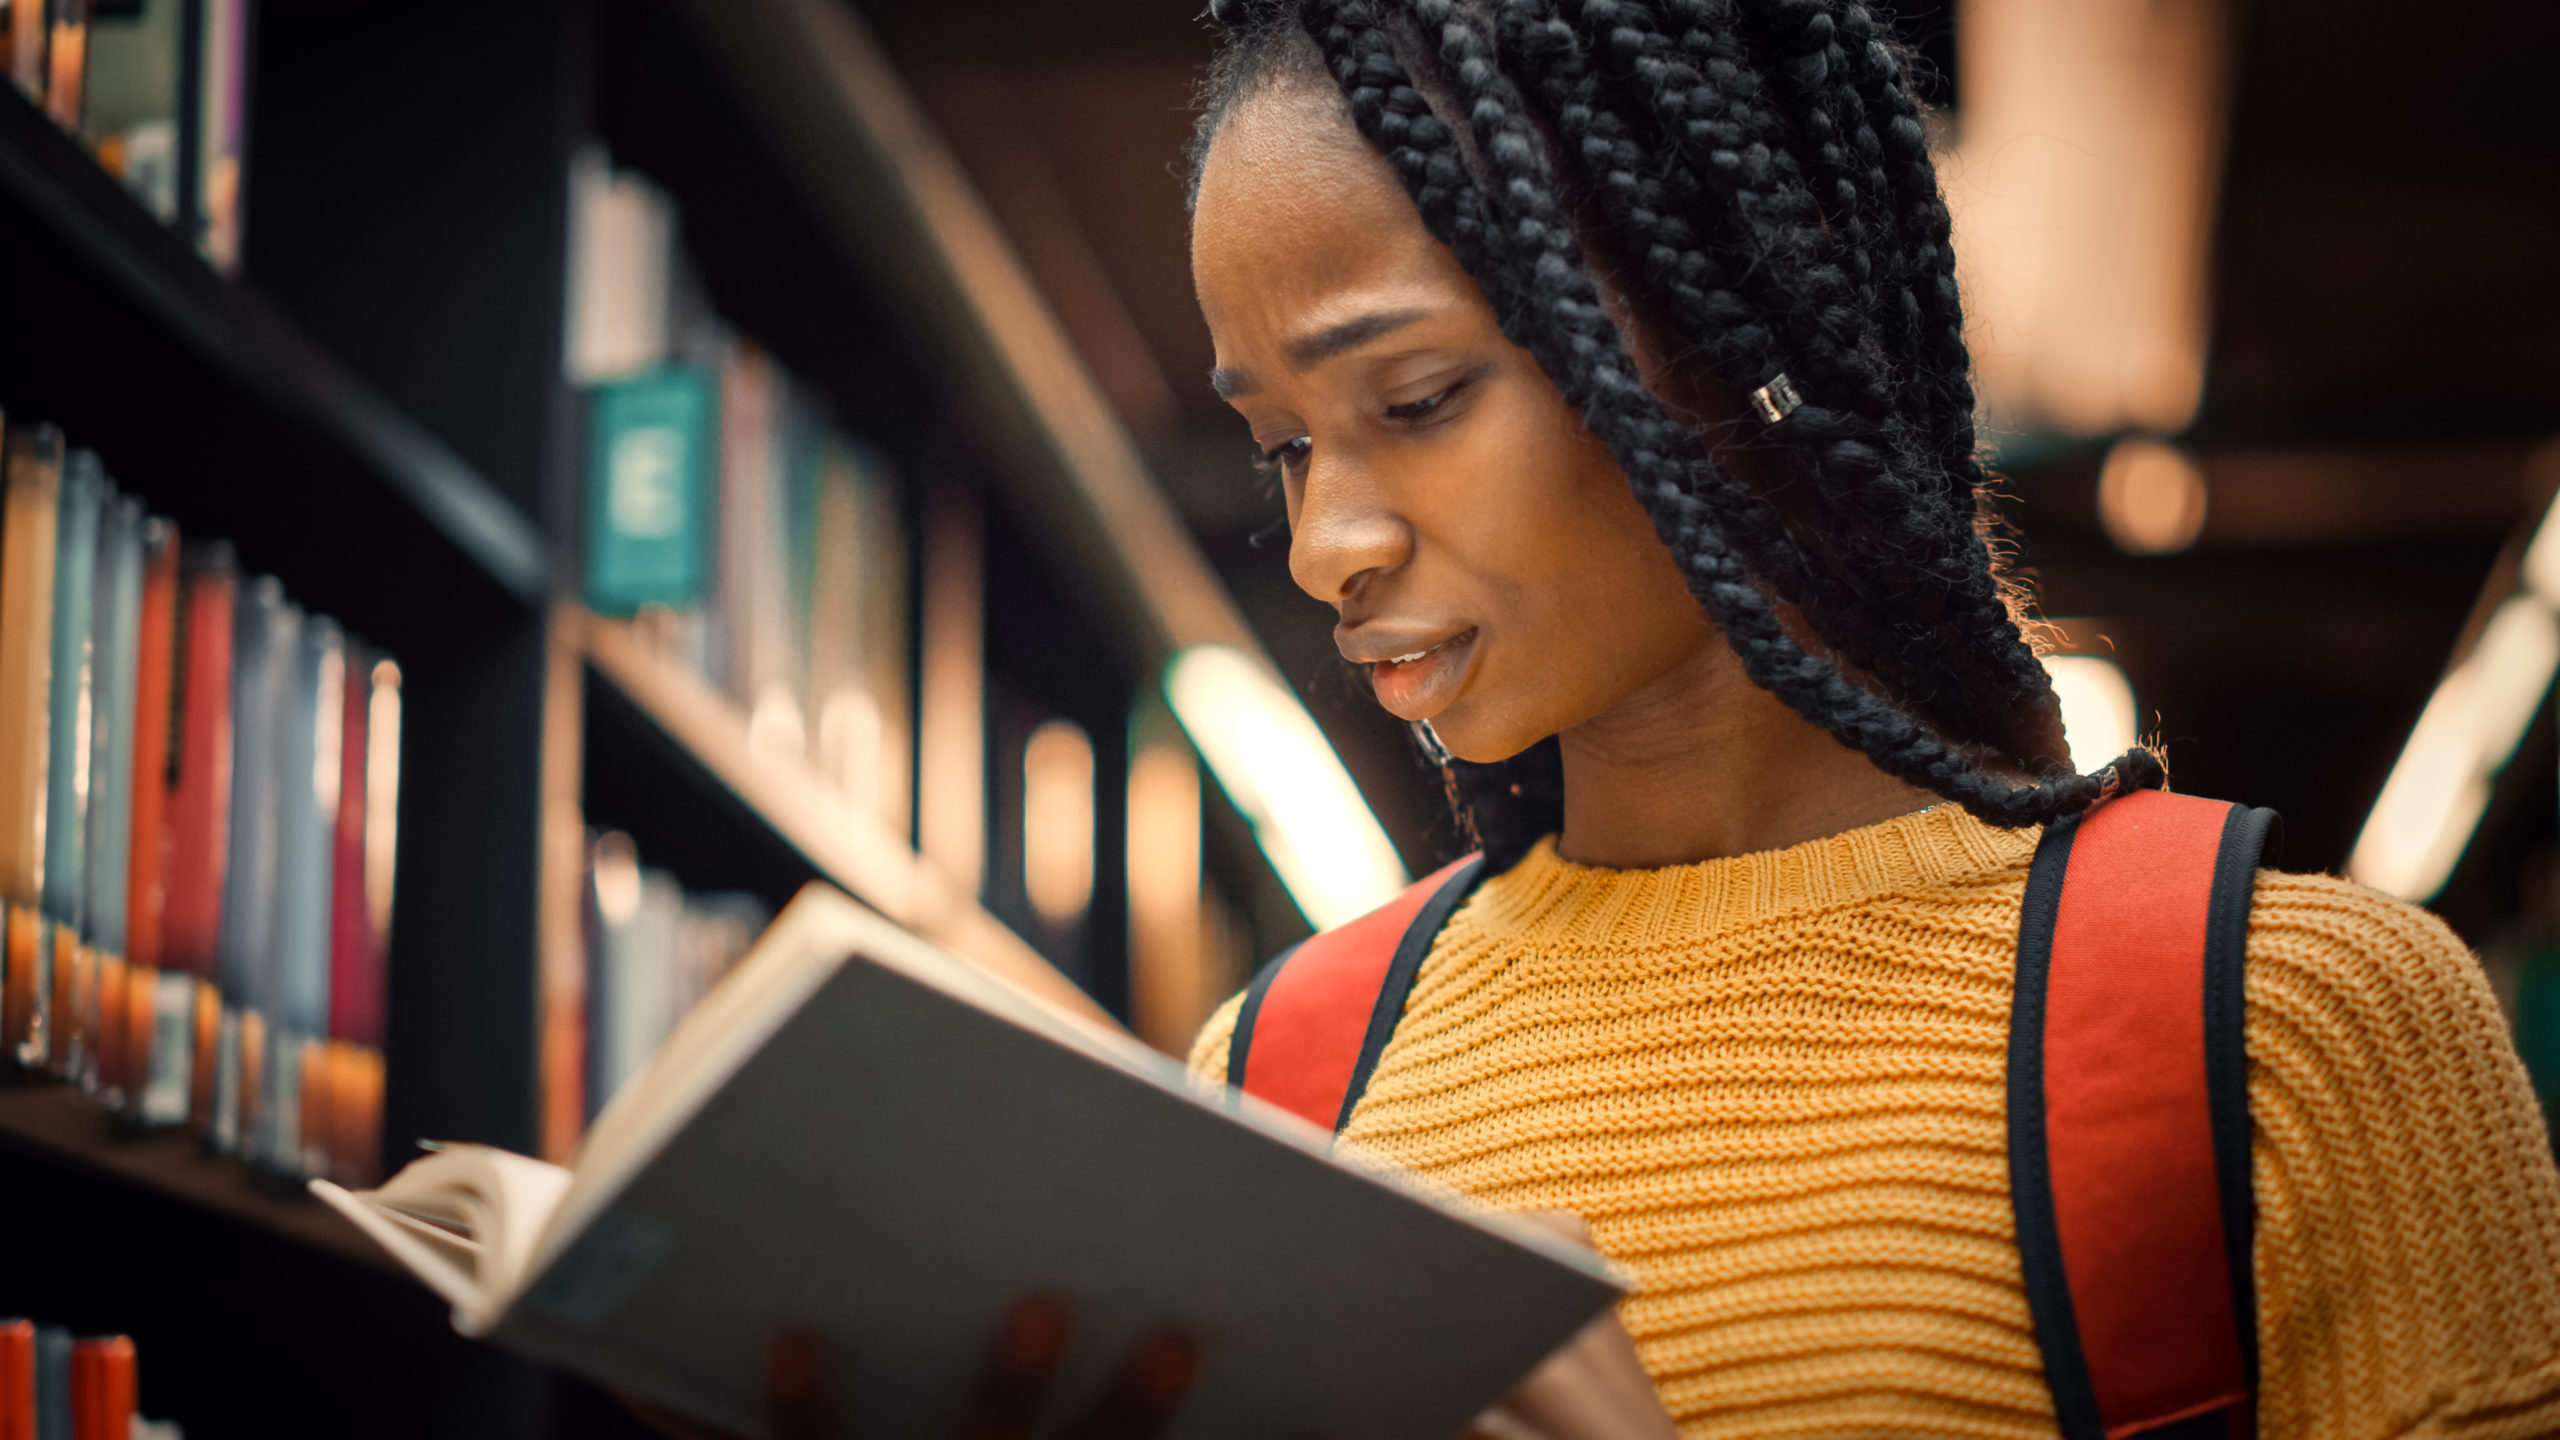 Young black teenager with braids, reading a book in a library.